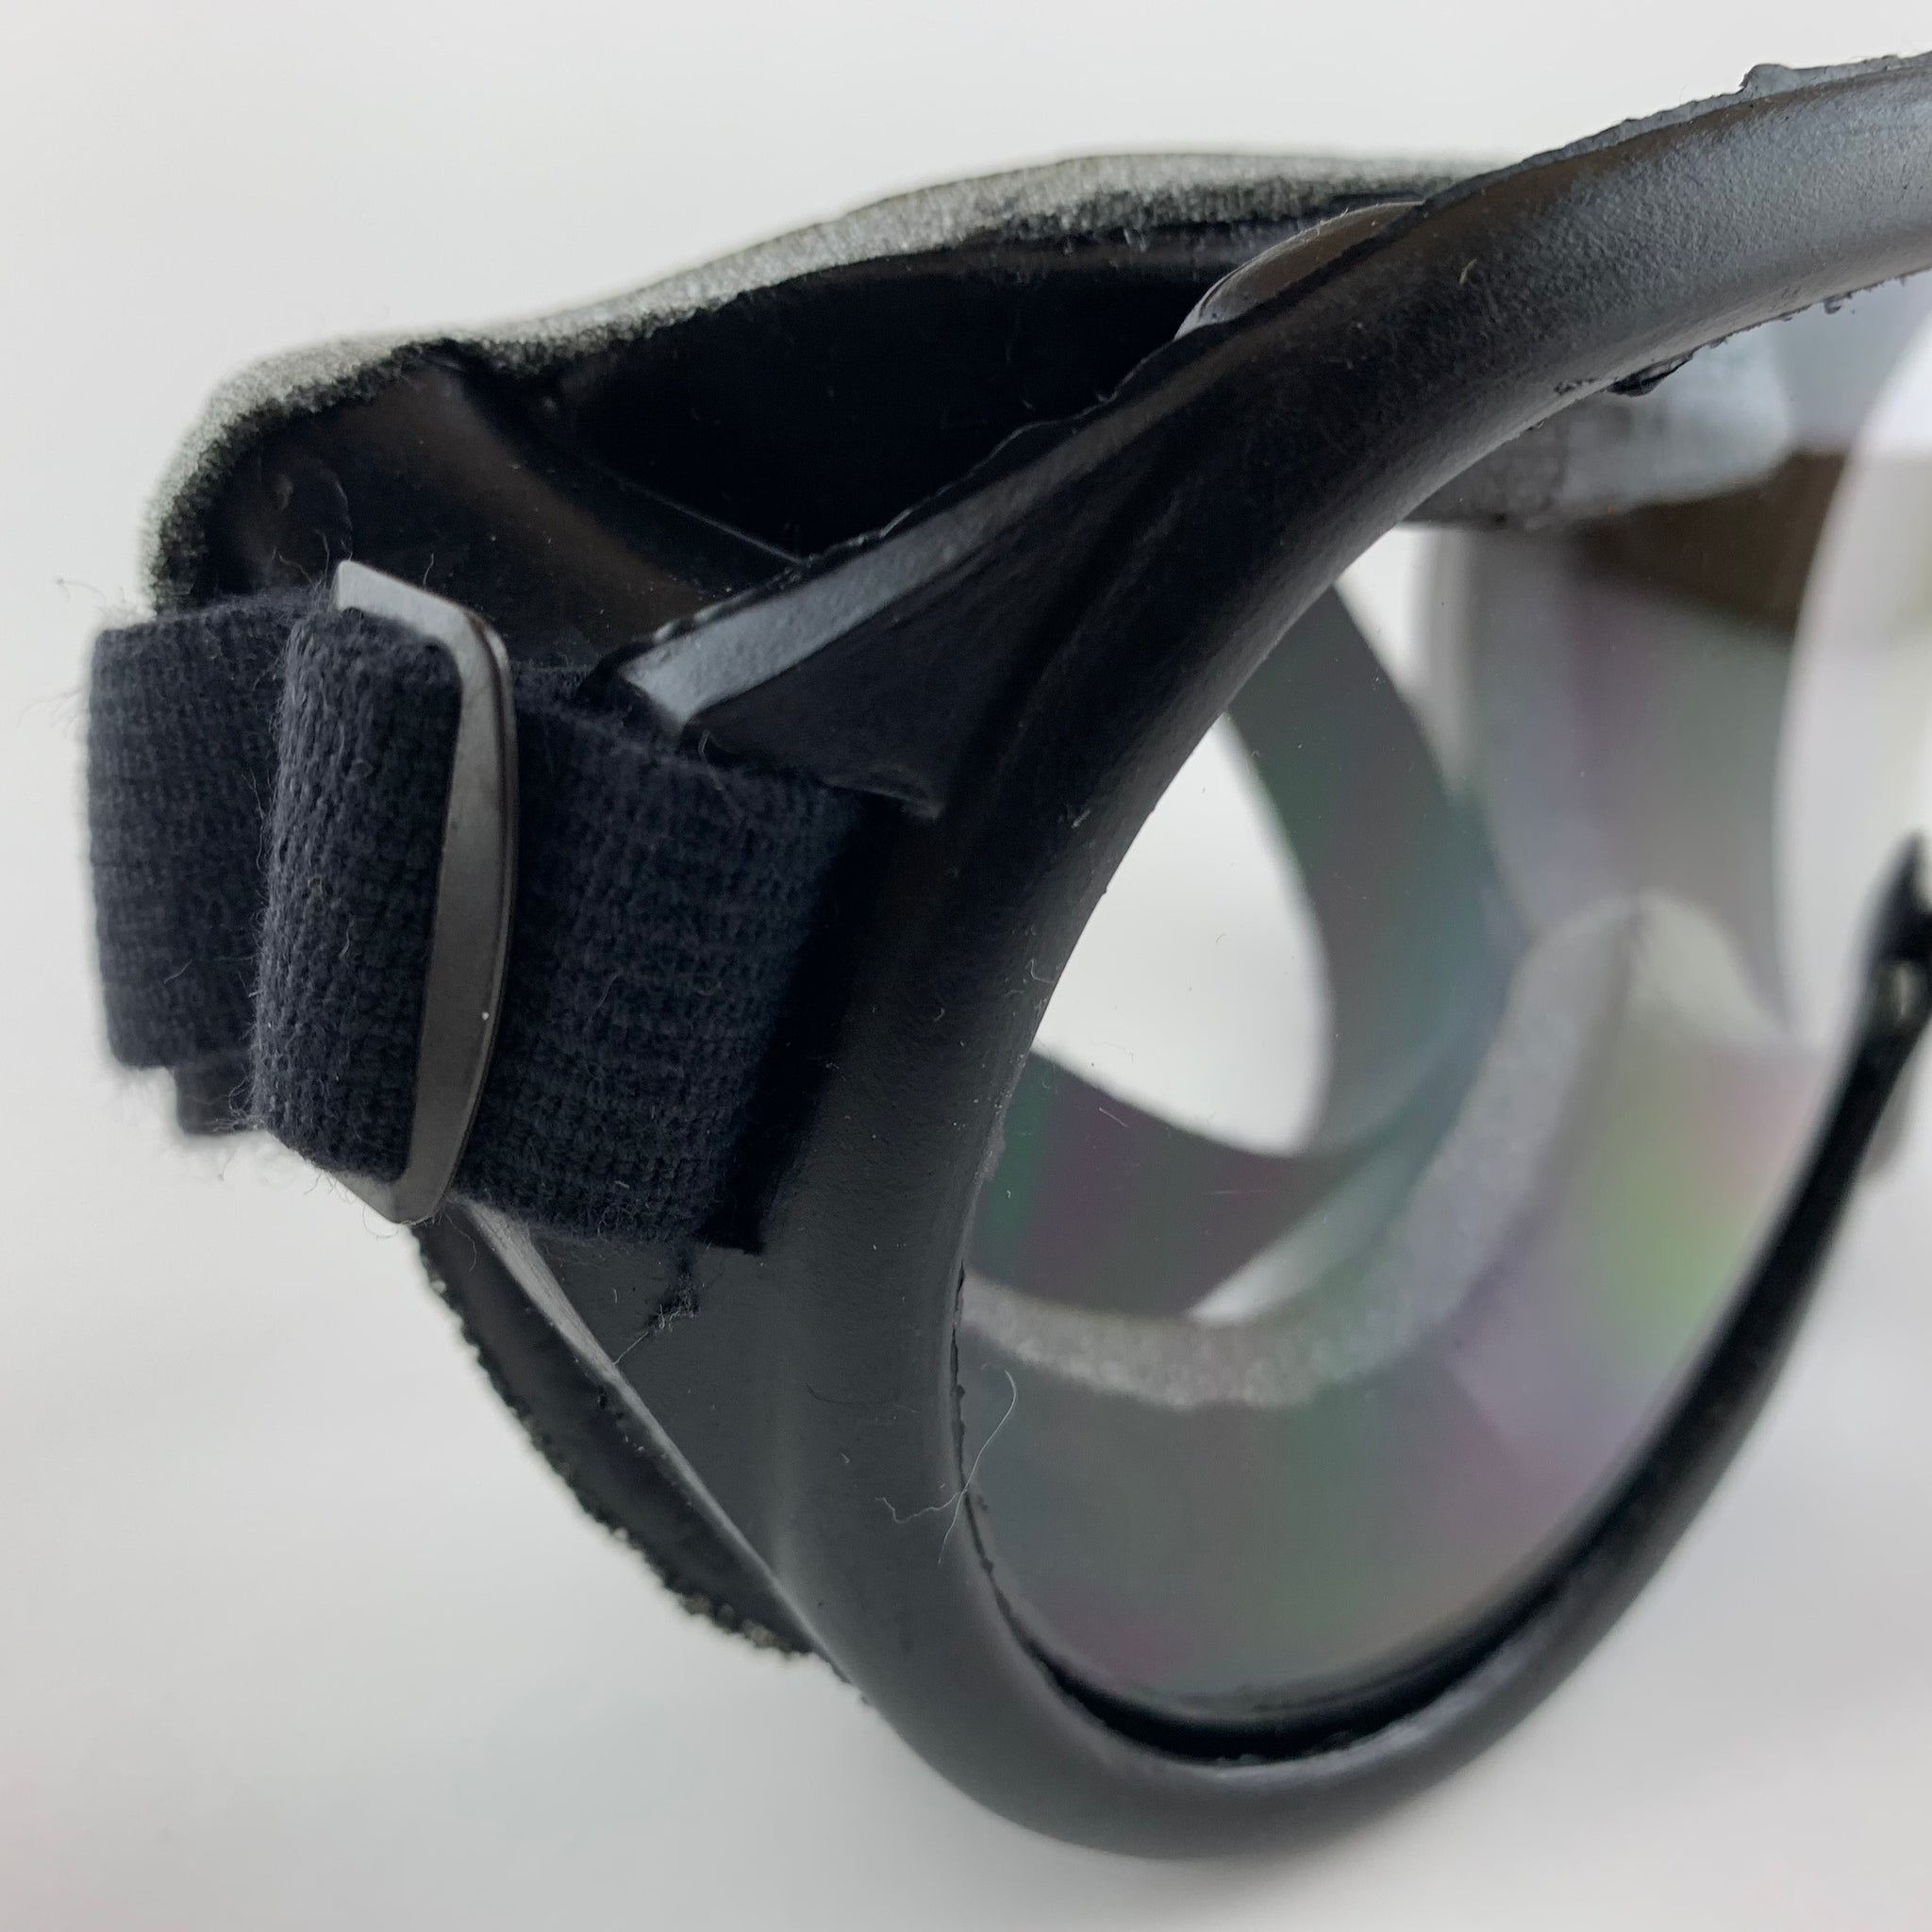 I have this pair of usgi sun wind and dust goggles that I'd like to use for  a themed kit but I'm uncertain of their protection. The lenses are very  thick and